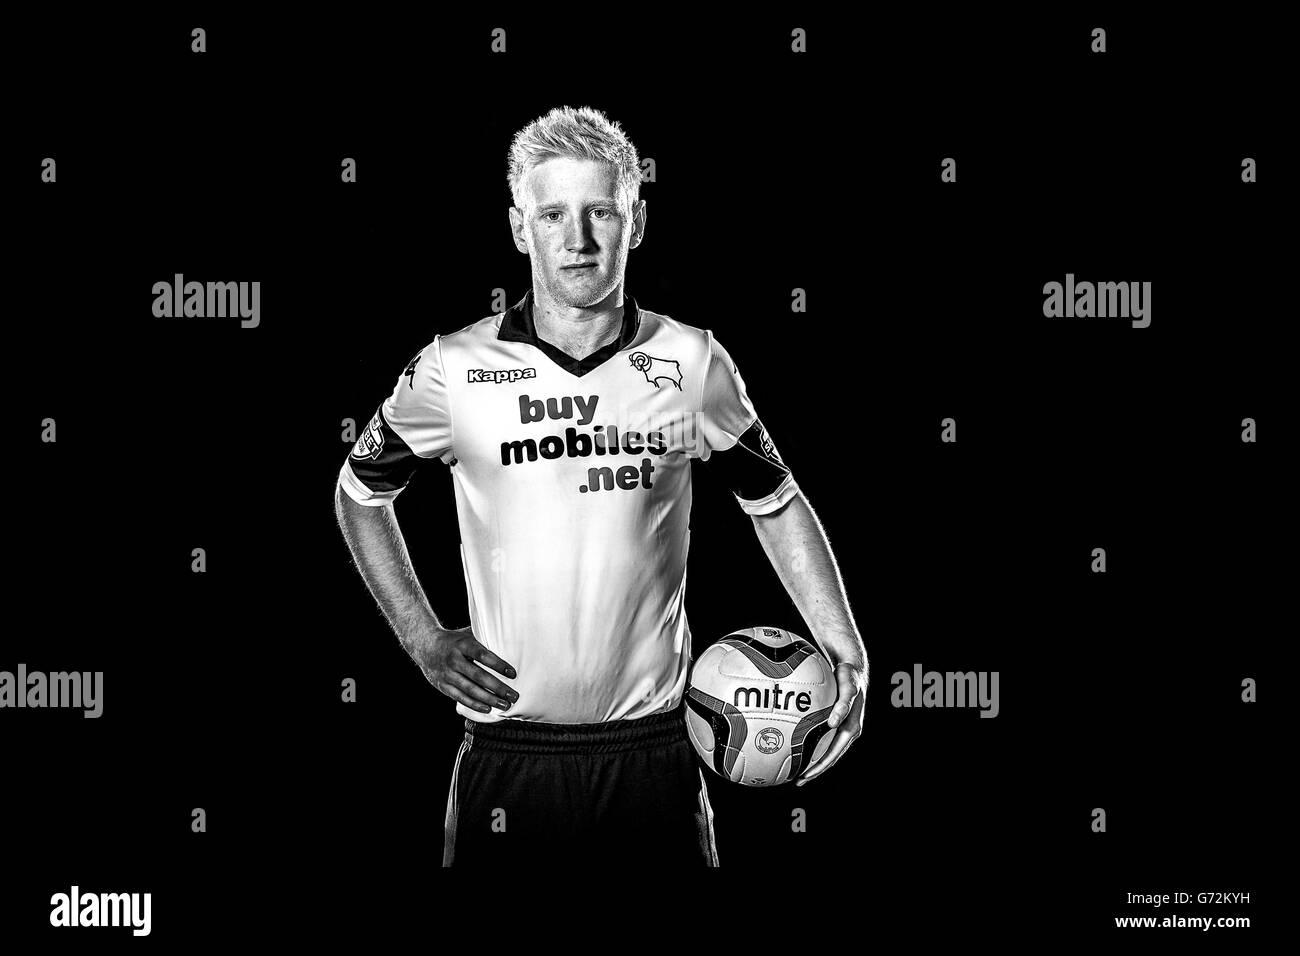 Soccer - Sky Bet Championship - Derby County Play Off Feature 2013/14 - Moore Farm Training Ground. Will Hughes, Derby County Stock Photo